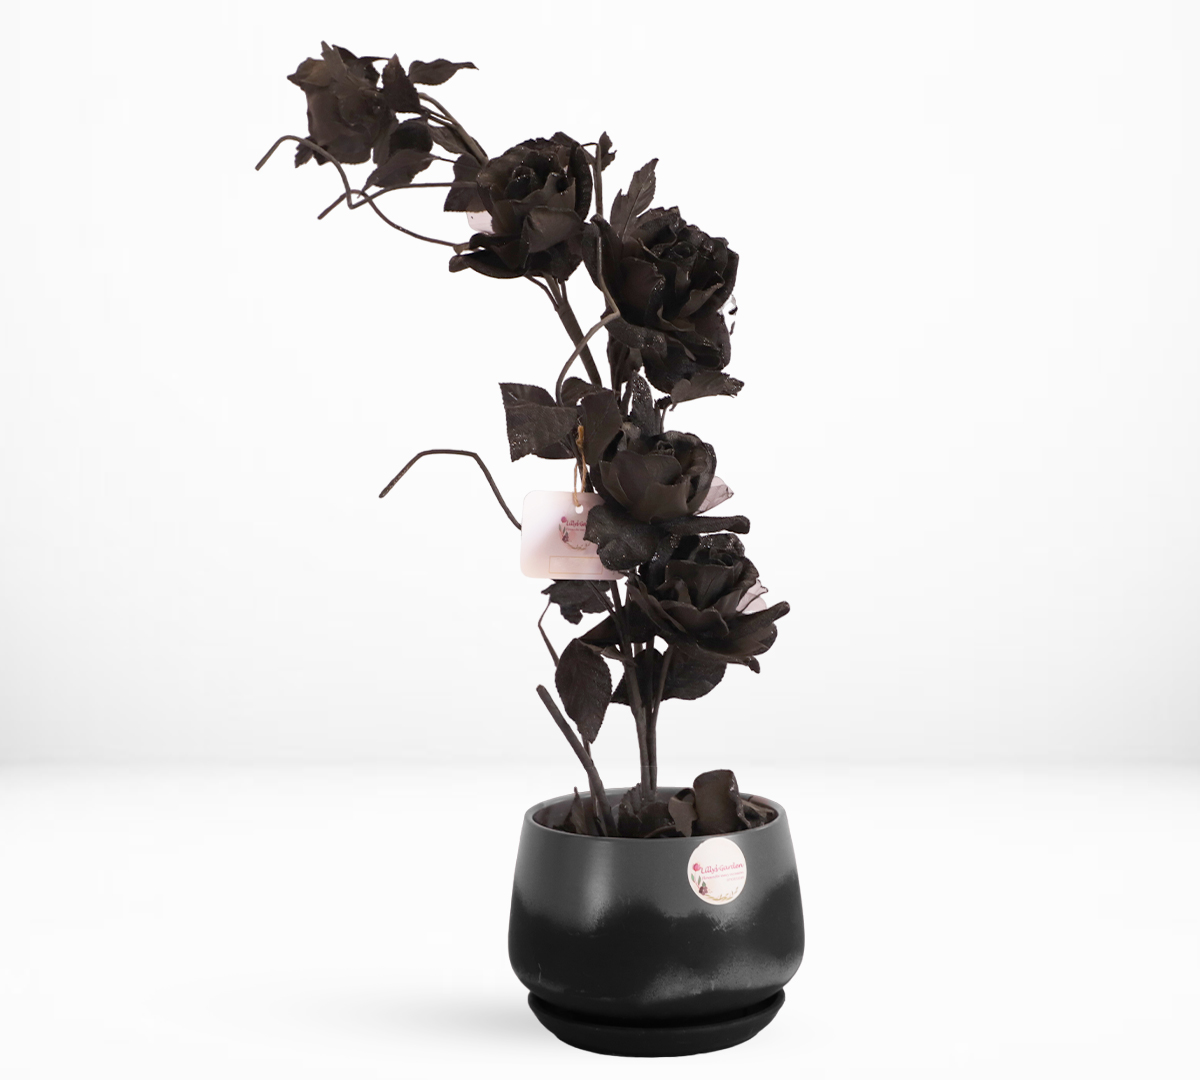 Decorative Ceramic Vase Filled with Artificial Flowers - Hand Arranged